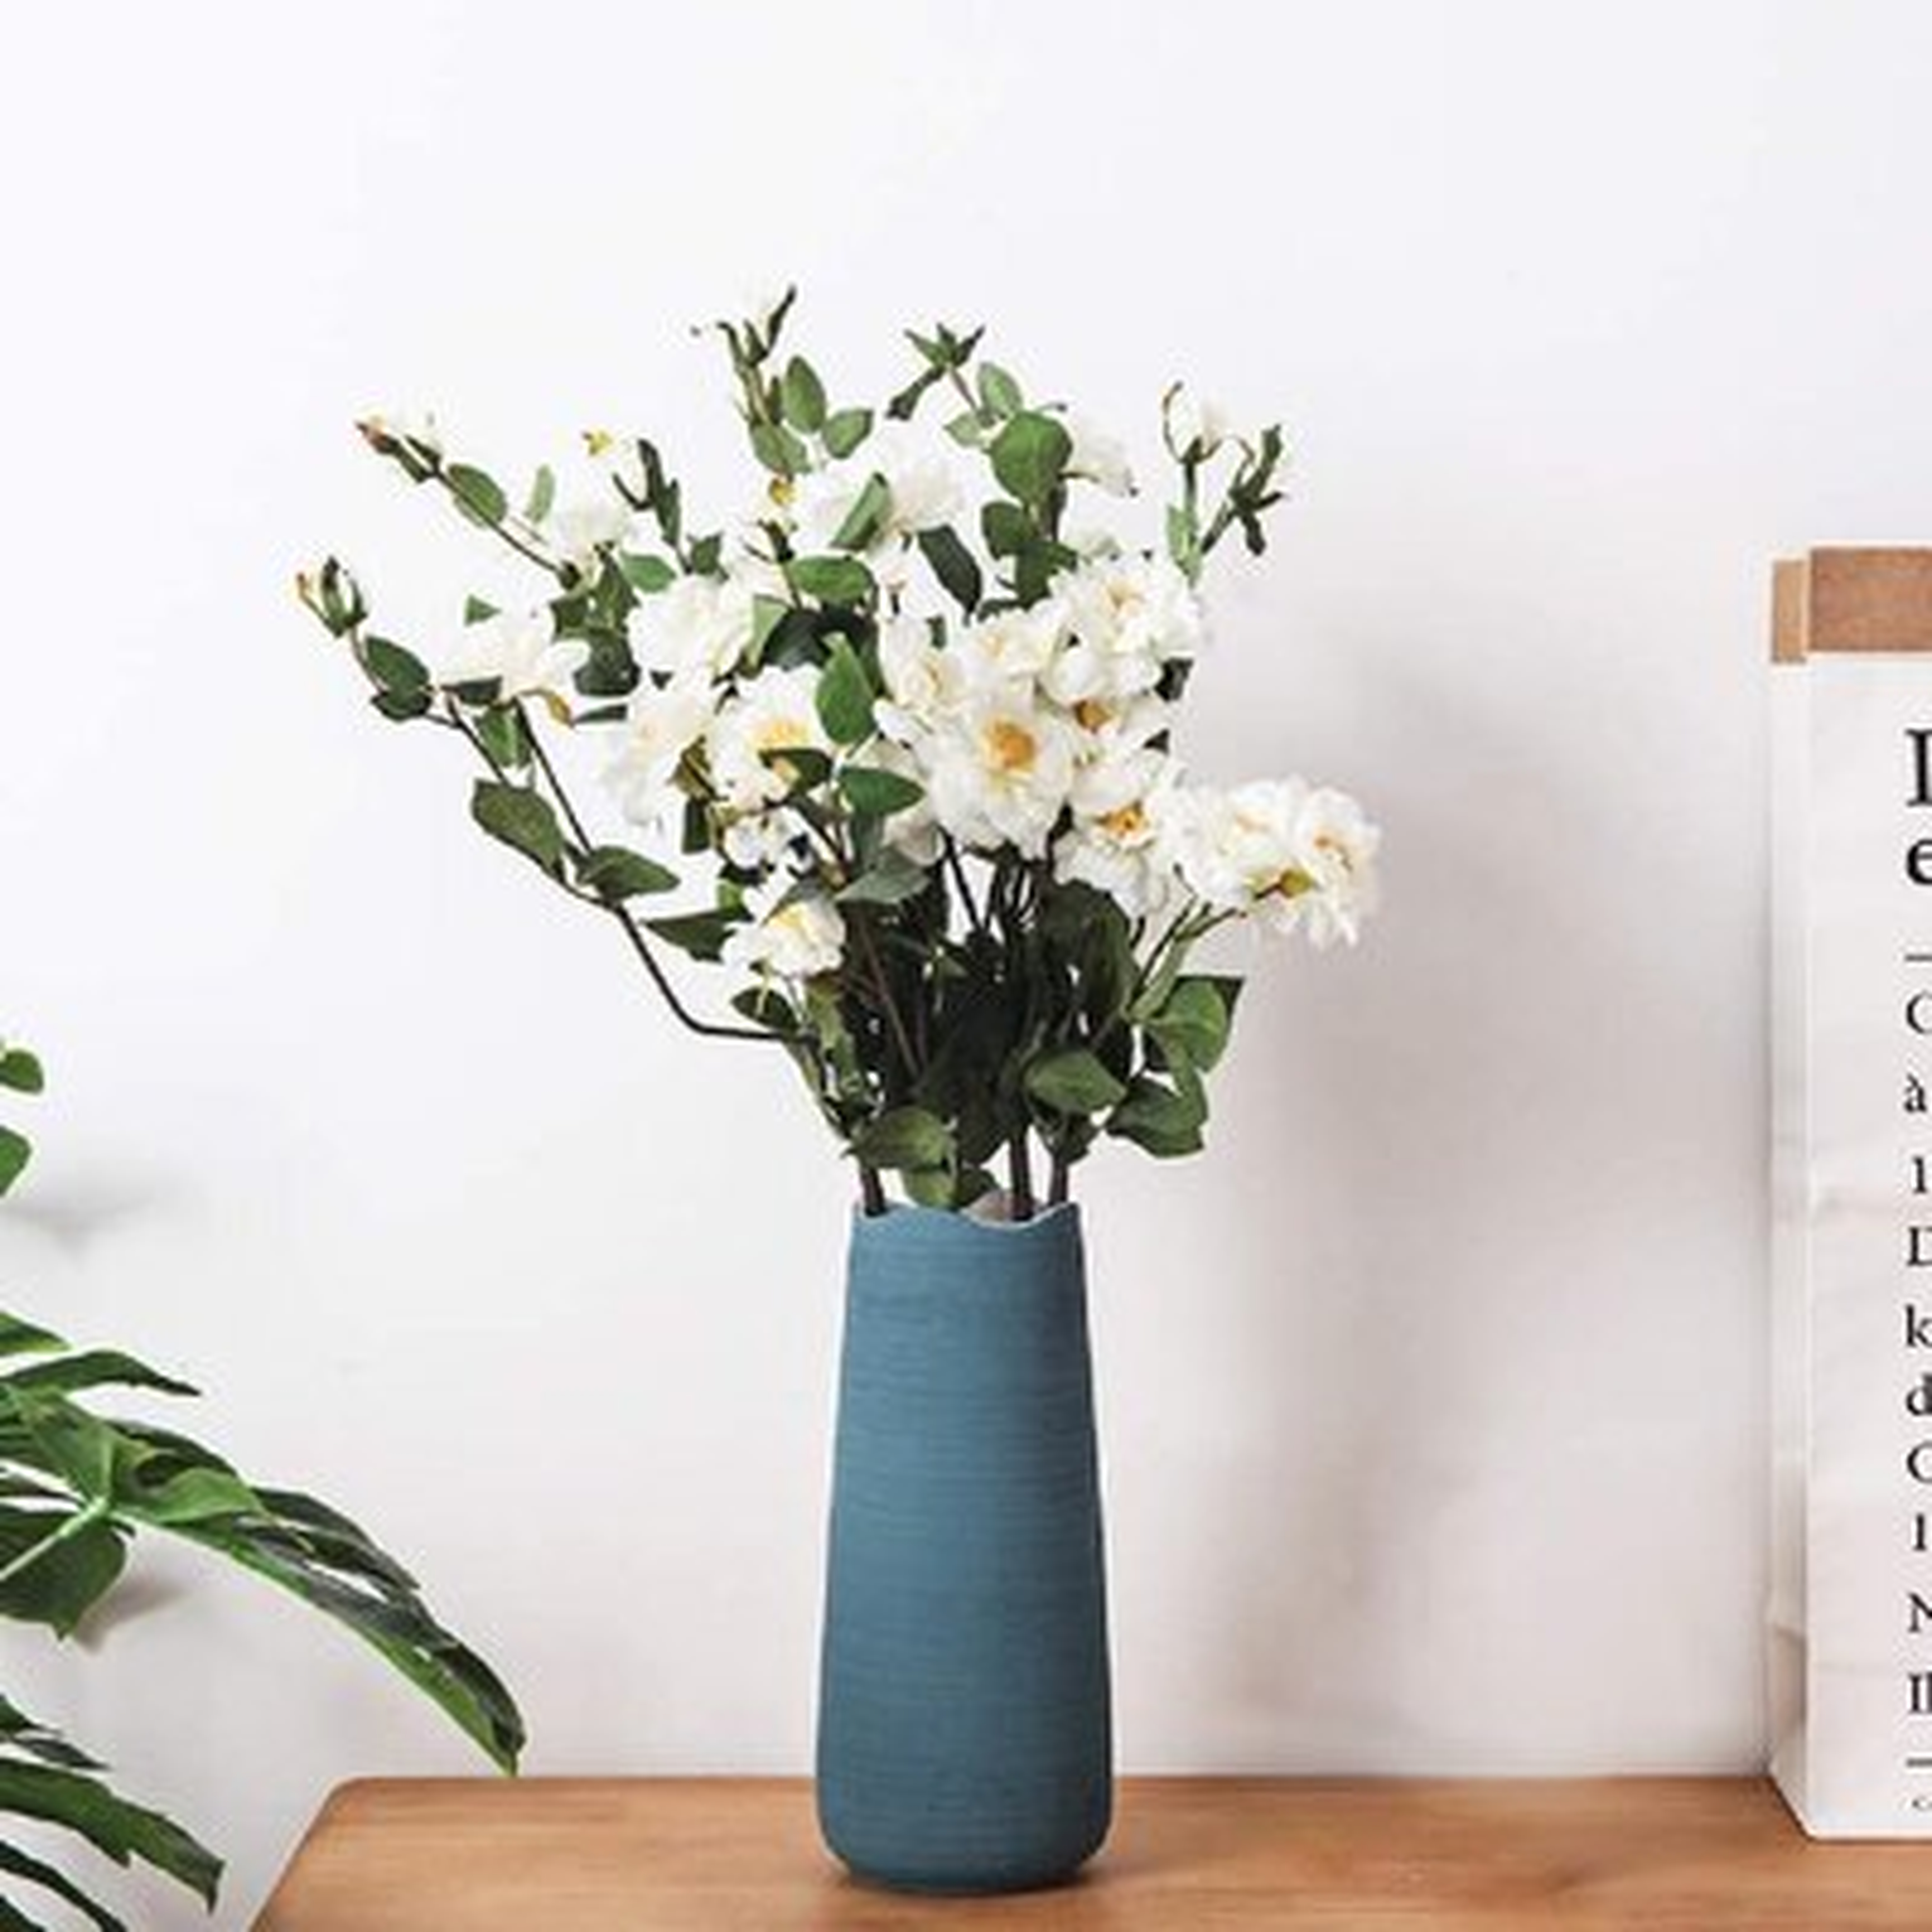 Ceramic Flower Vase Home Decor Vase And Table Centerpieces Vase - Ideal Gifts For Friends And Family, Christmas, Wedding, Bridal Shower - Wayfair